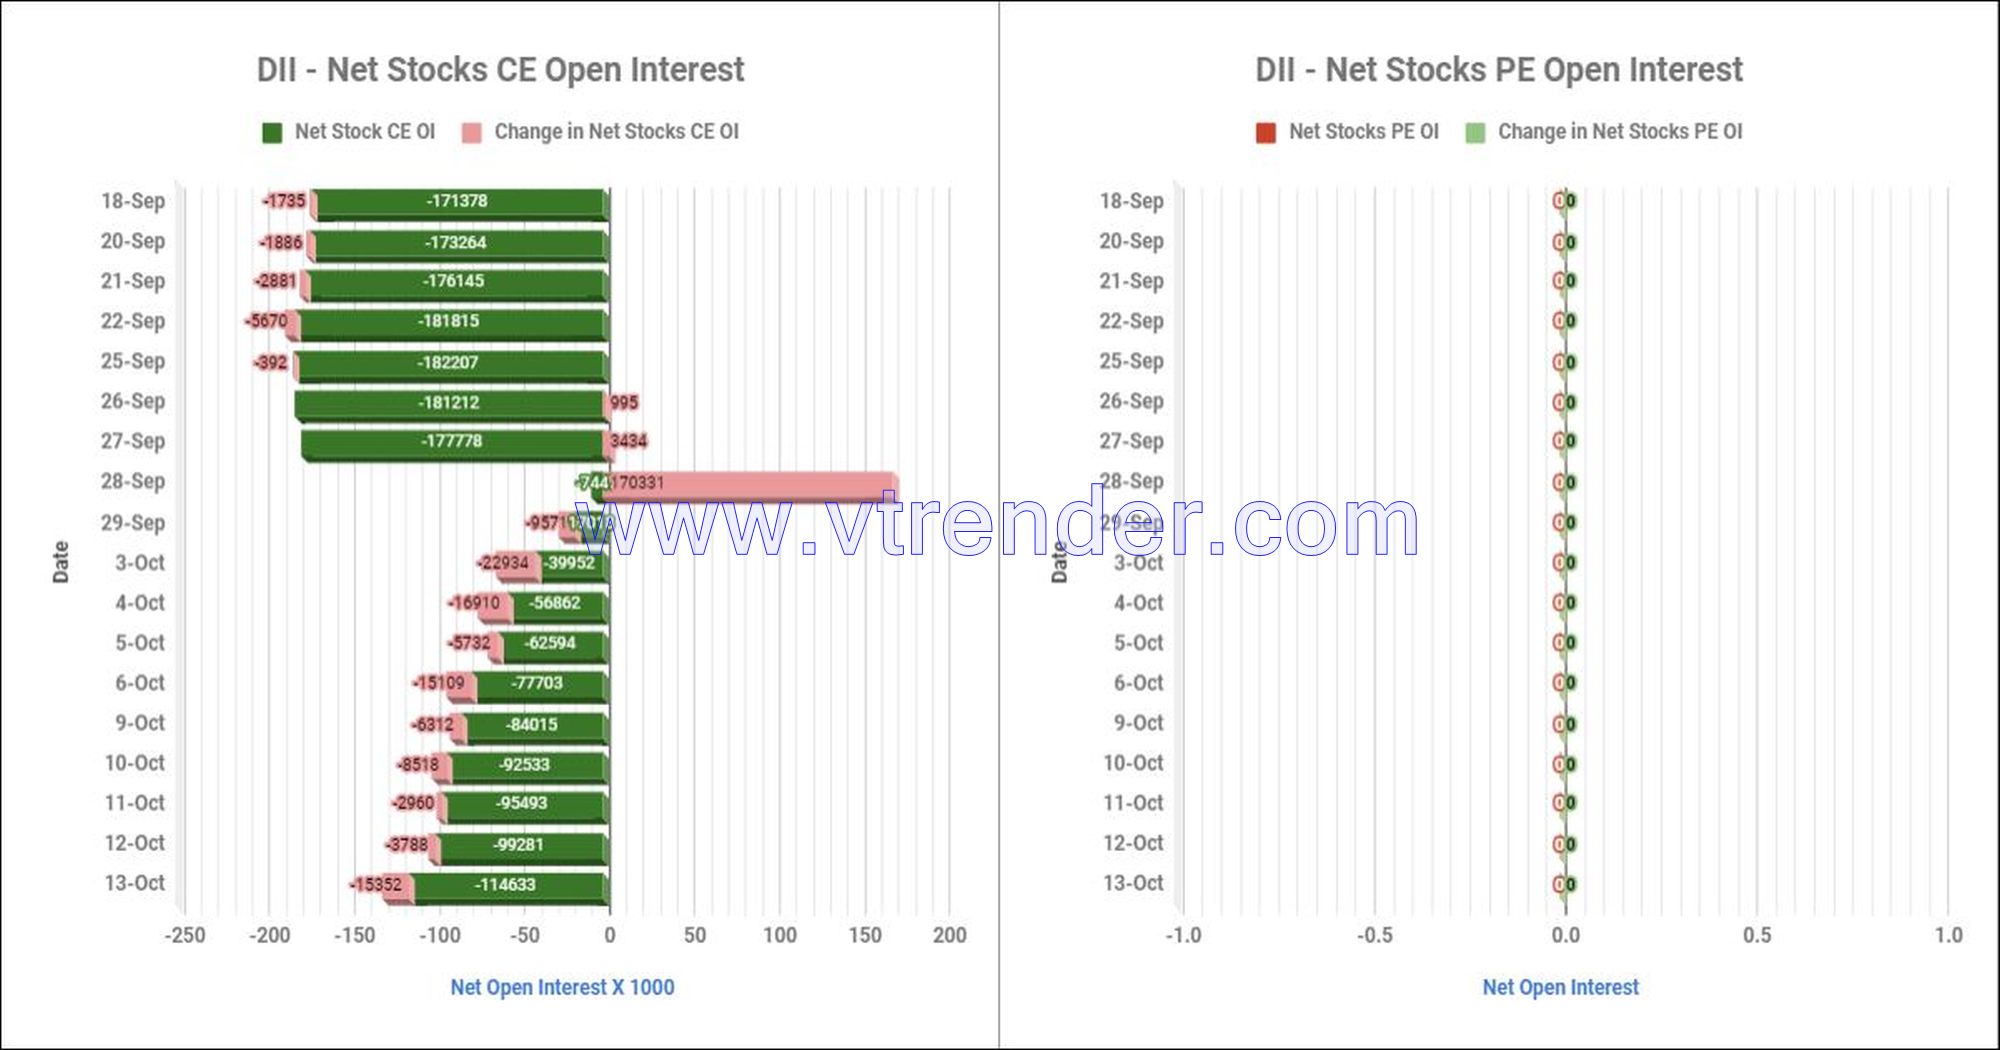 Diistop13Oct Participantwise Net Open Interest And Net Equity Investments – 13Th Oct 2023 Ce, Client, Dii, Fii, Index Futures, Index Options, Open Interest, Pe, Prop, Stocks Futures